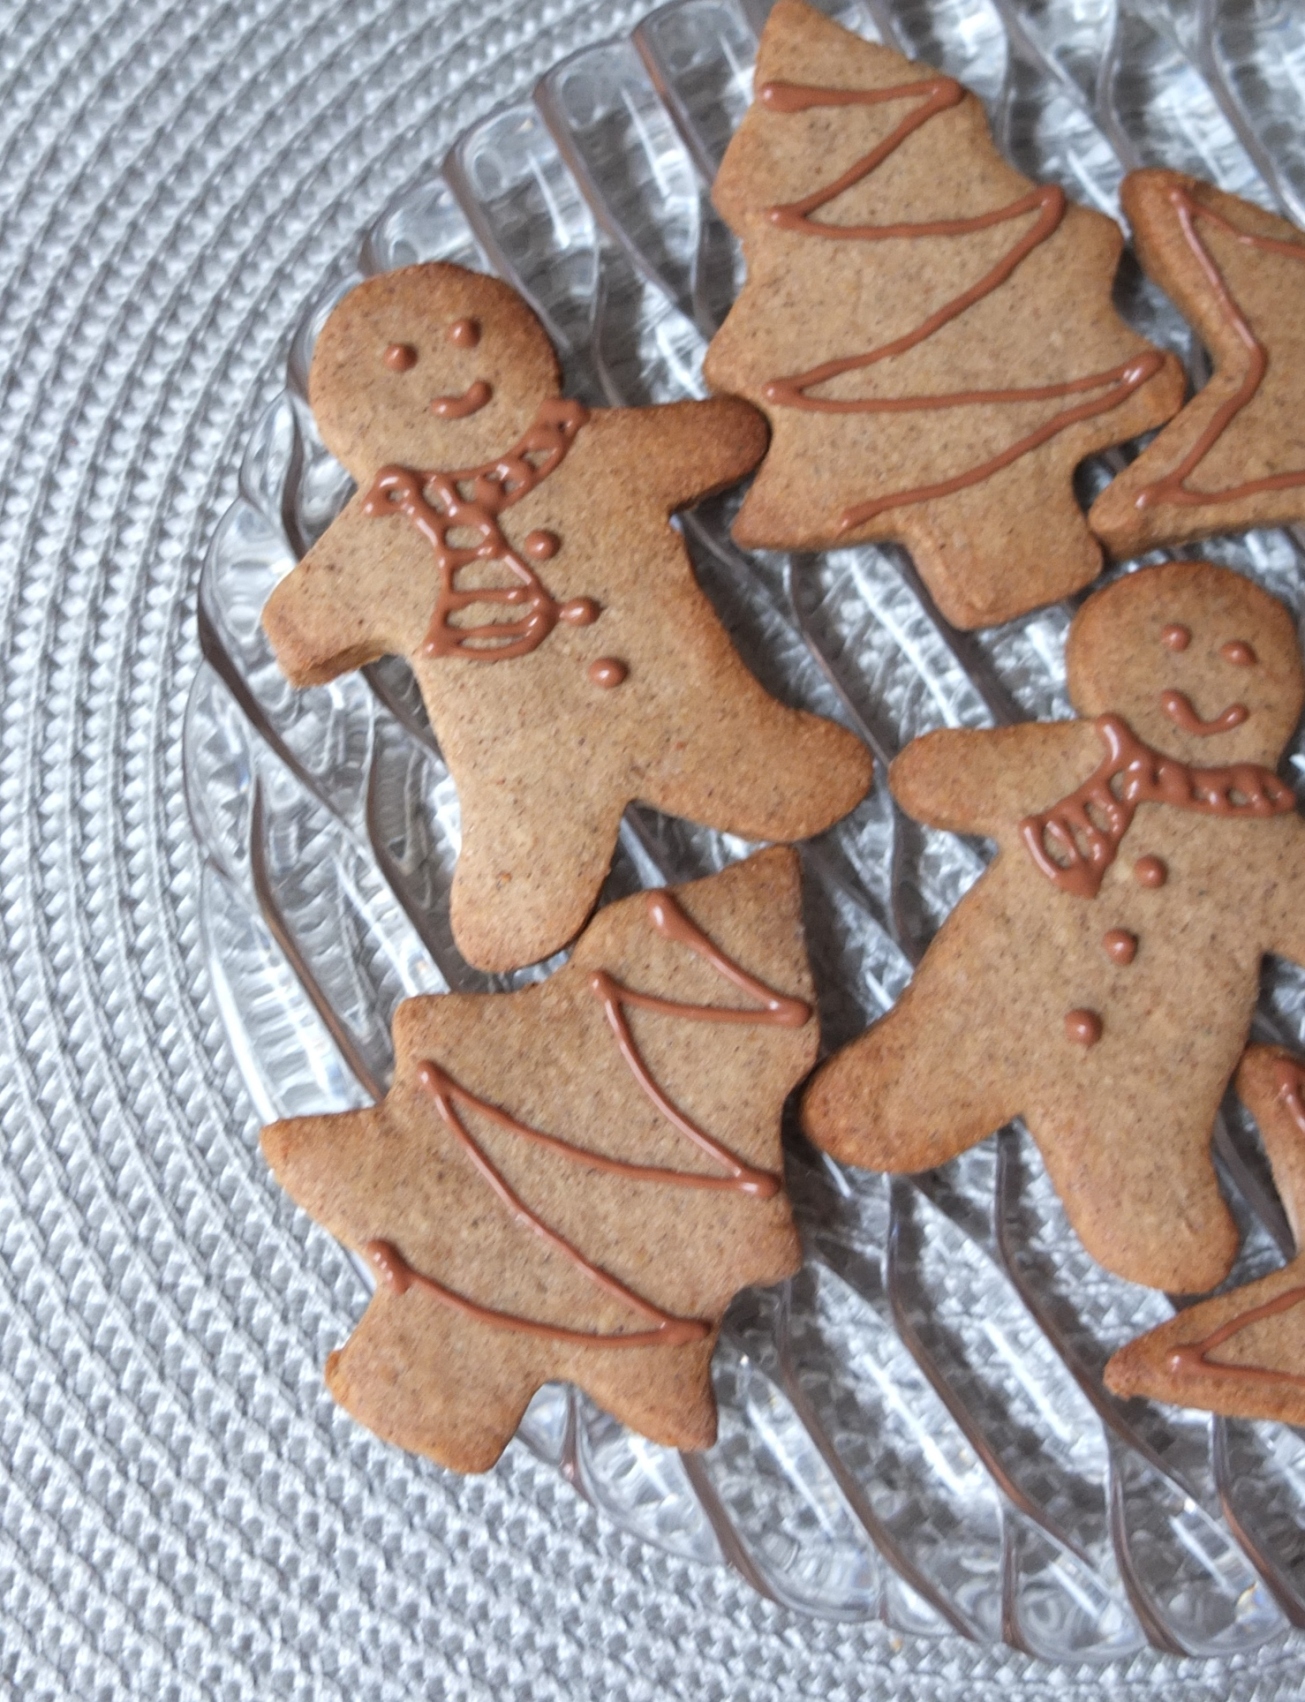 Healthier spiced Xmas biscuits